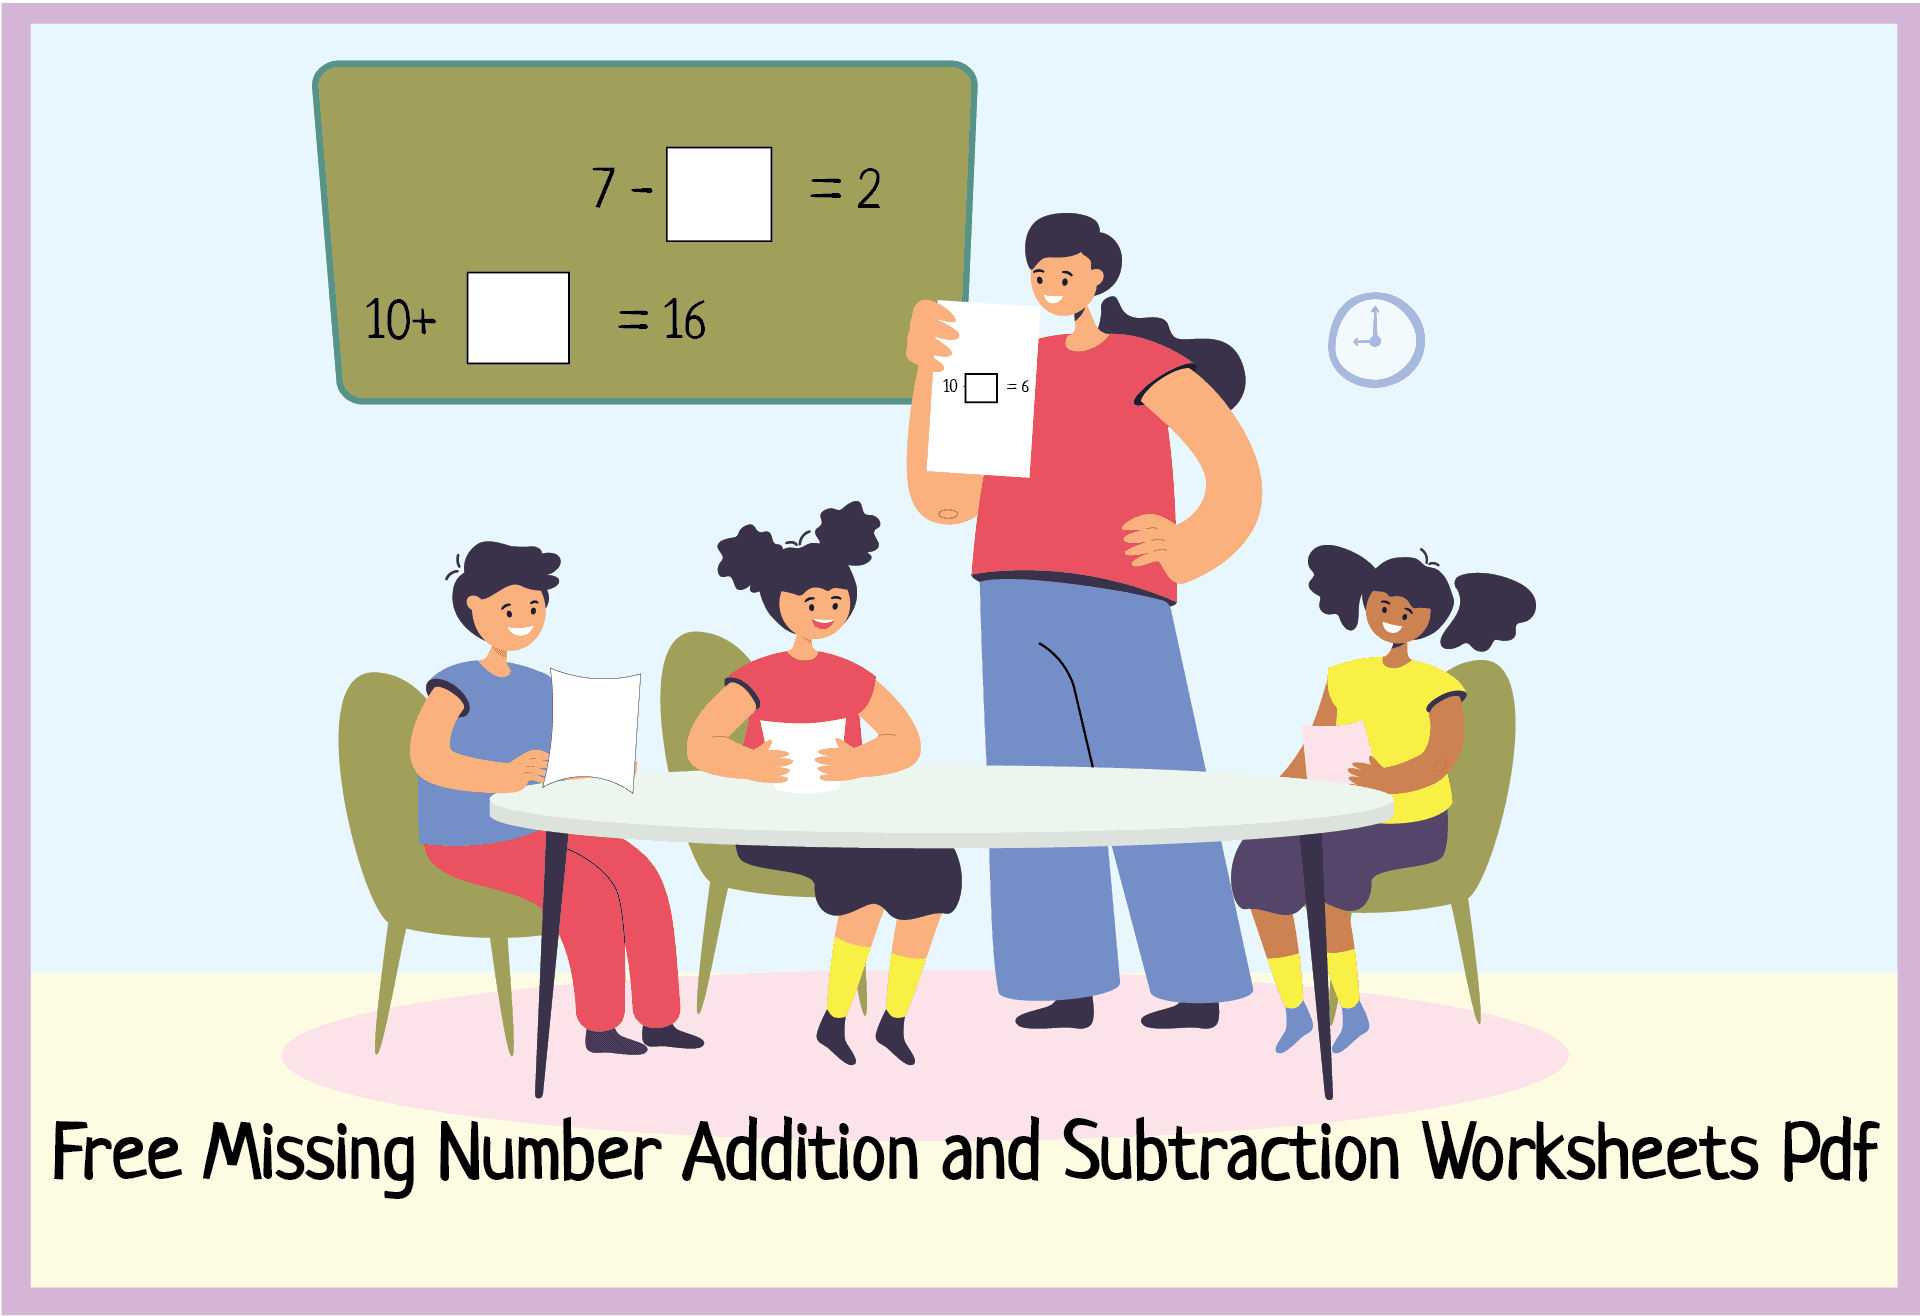 10+ Free Missing Number Addition and Subtraction Worksheets PDF